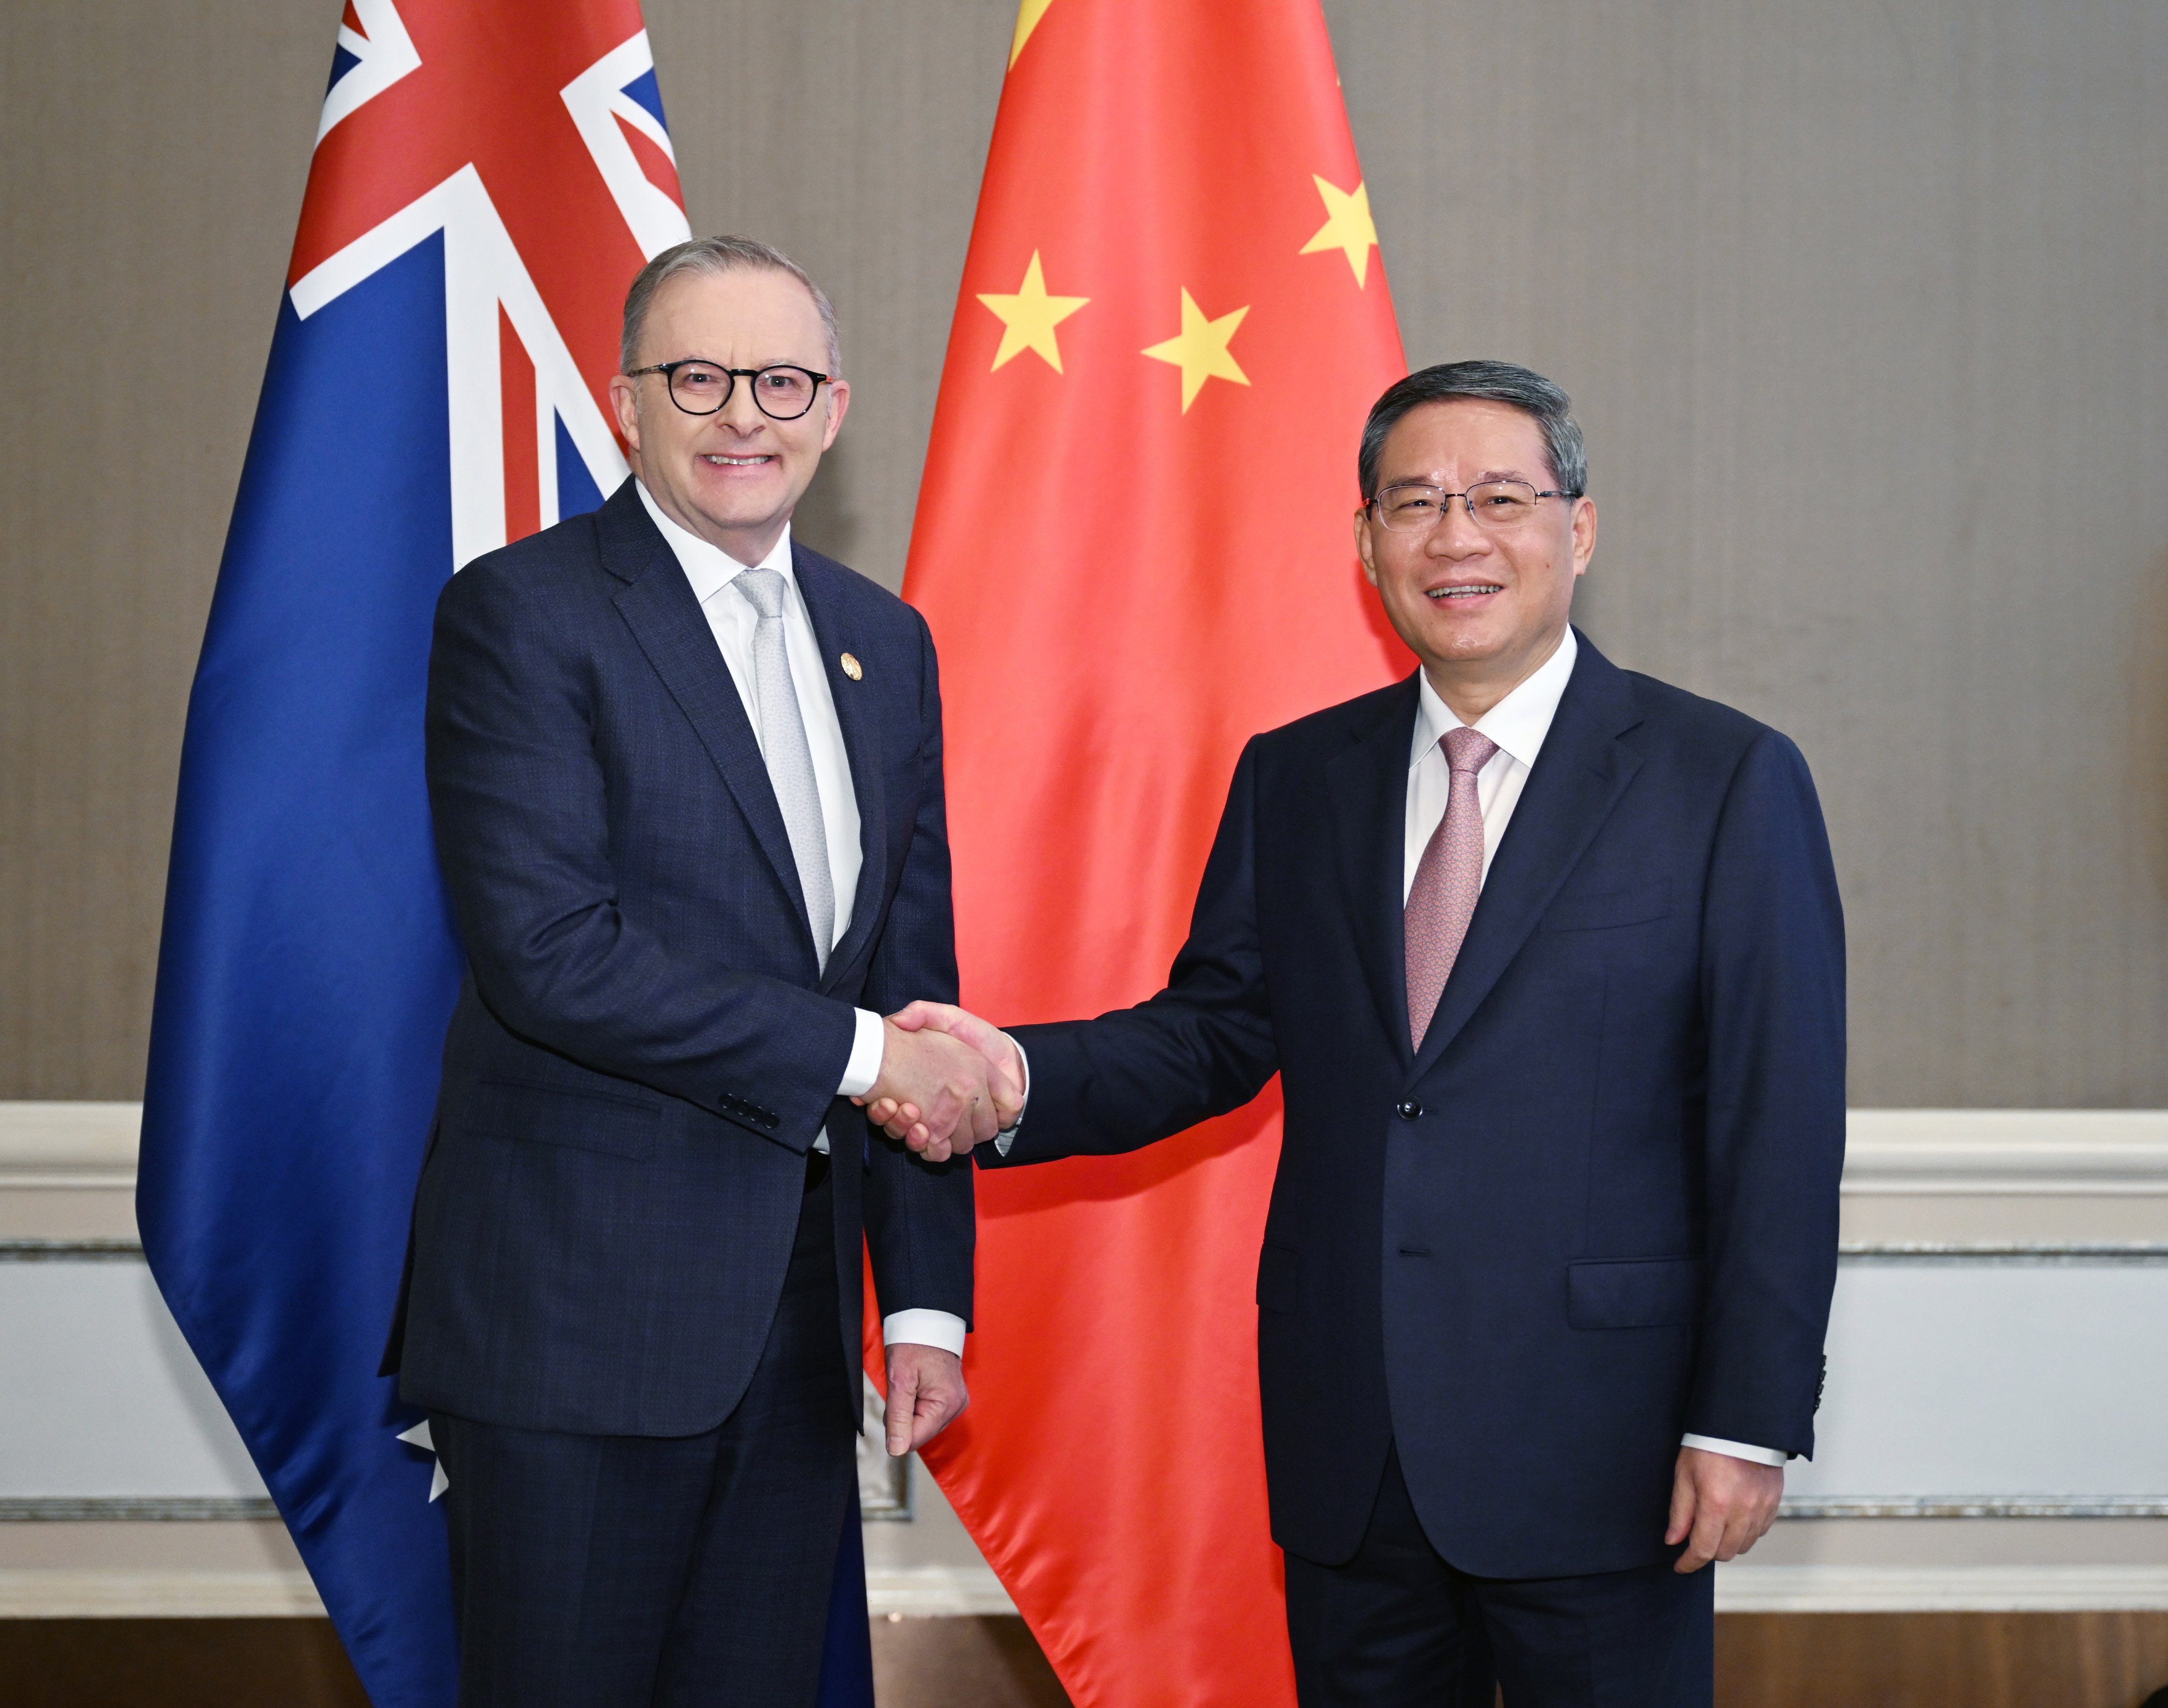 Australian Prime Minister Anthony Albanese shakes hands with Chinese Premier Li Qiang on the sidelines of the East Asia Summit in Jakarta last year. Photo: Xinhua